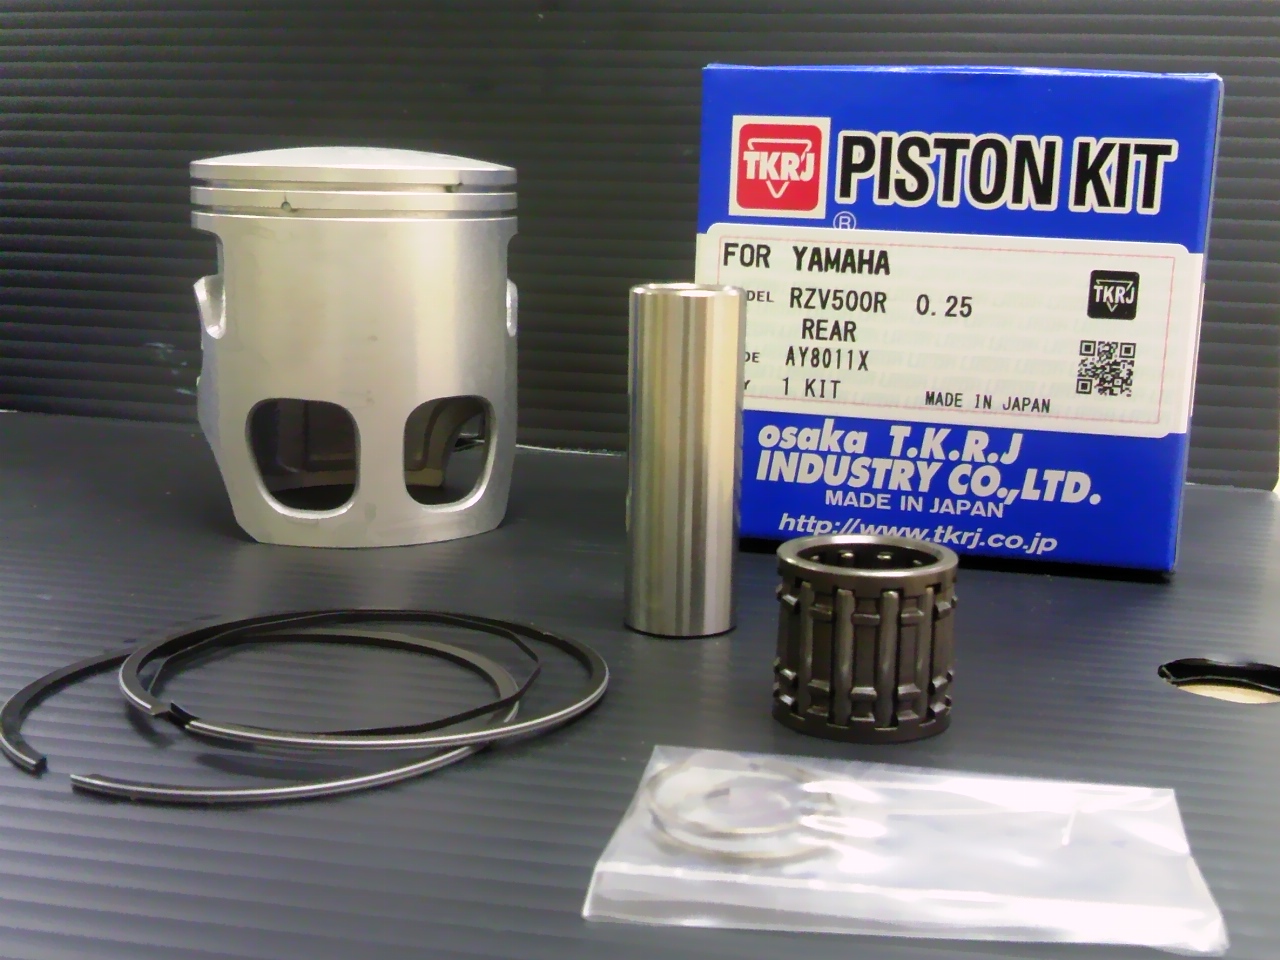 T.K.R.J. / MOTORCYCLE and OUTBOARD such as PISTON KIT and